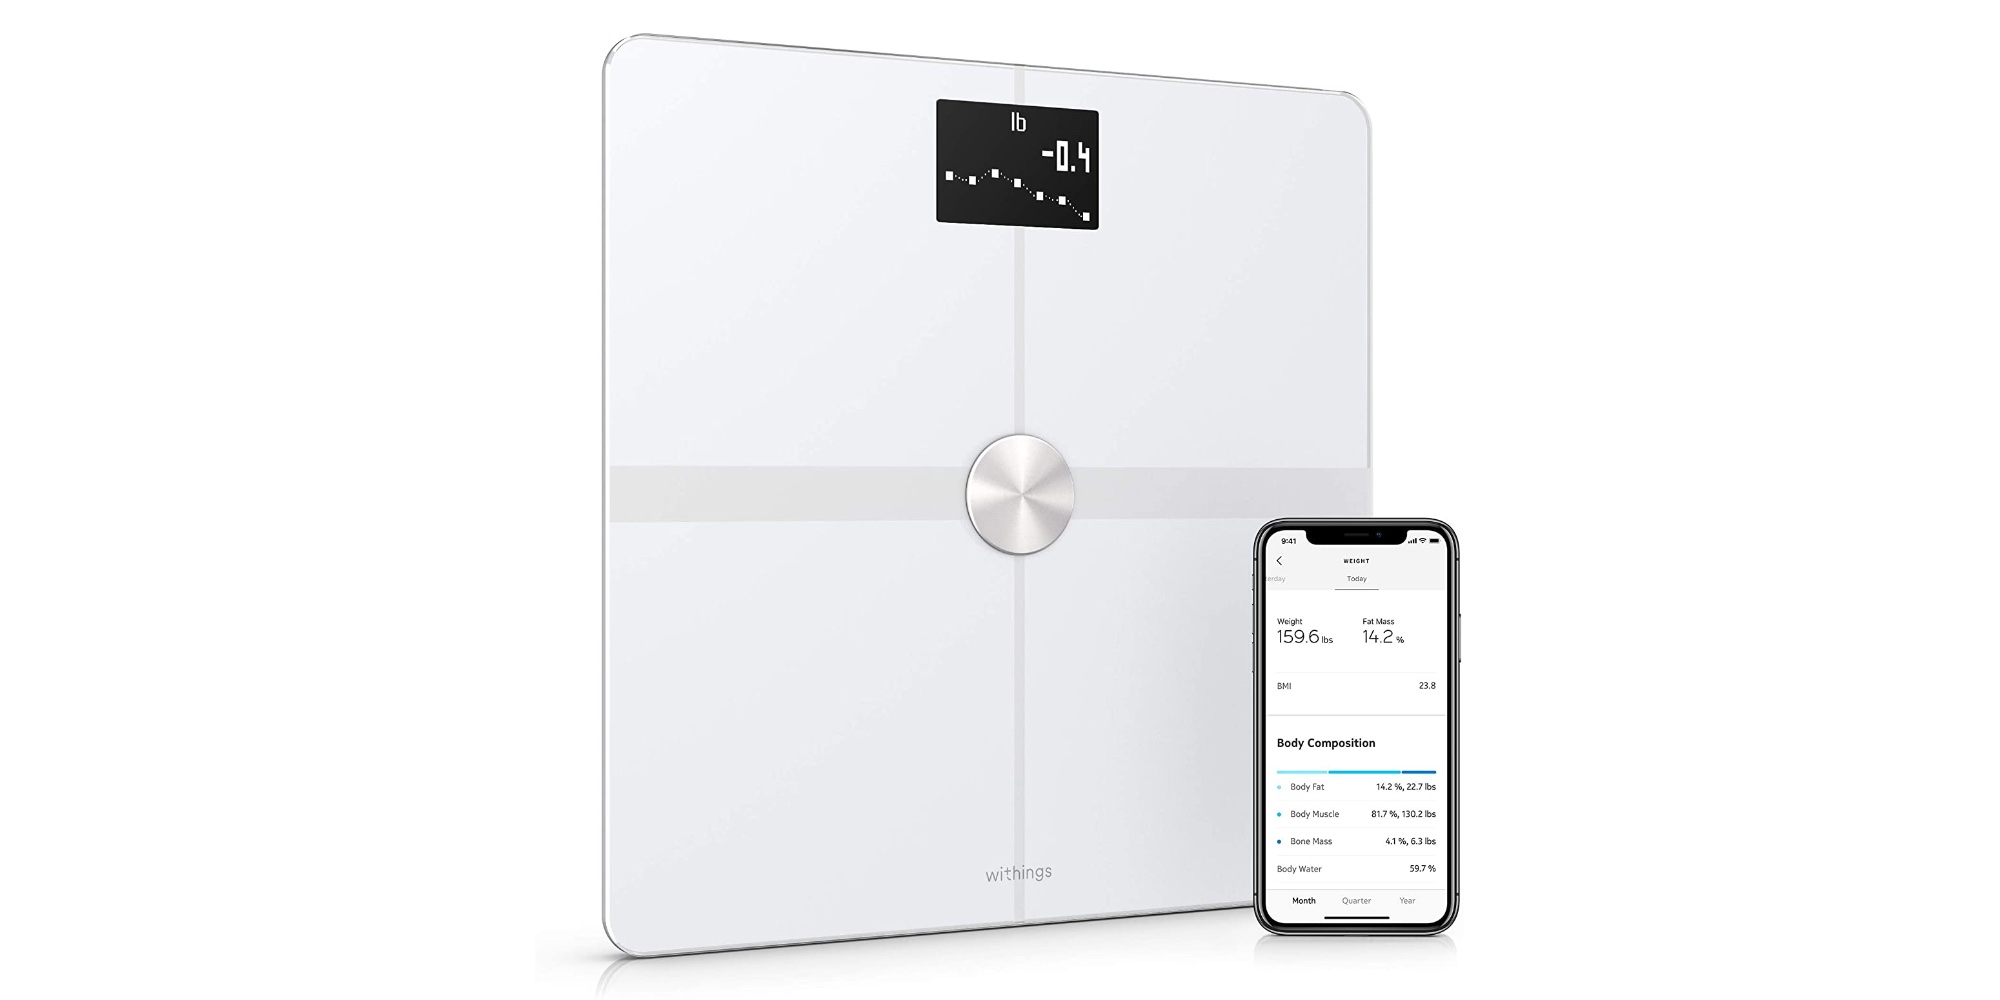 Deal of the Month: 20% off Withings Body+ Wi-Fi Smart Scale